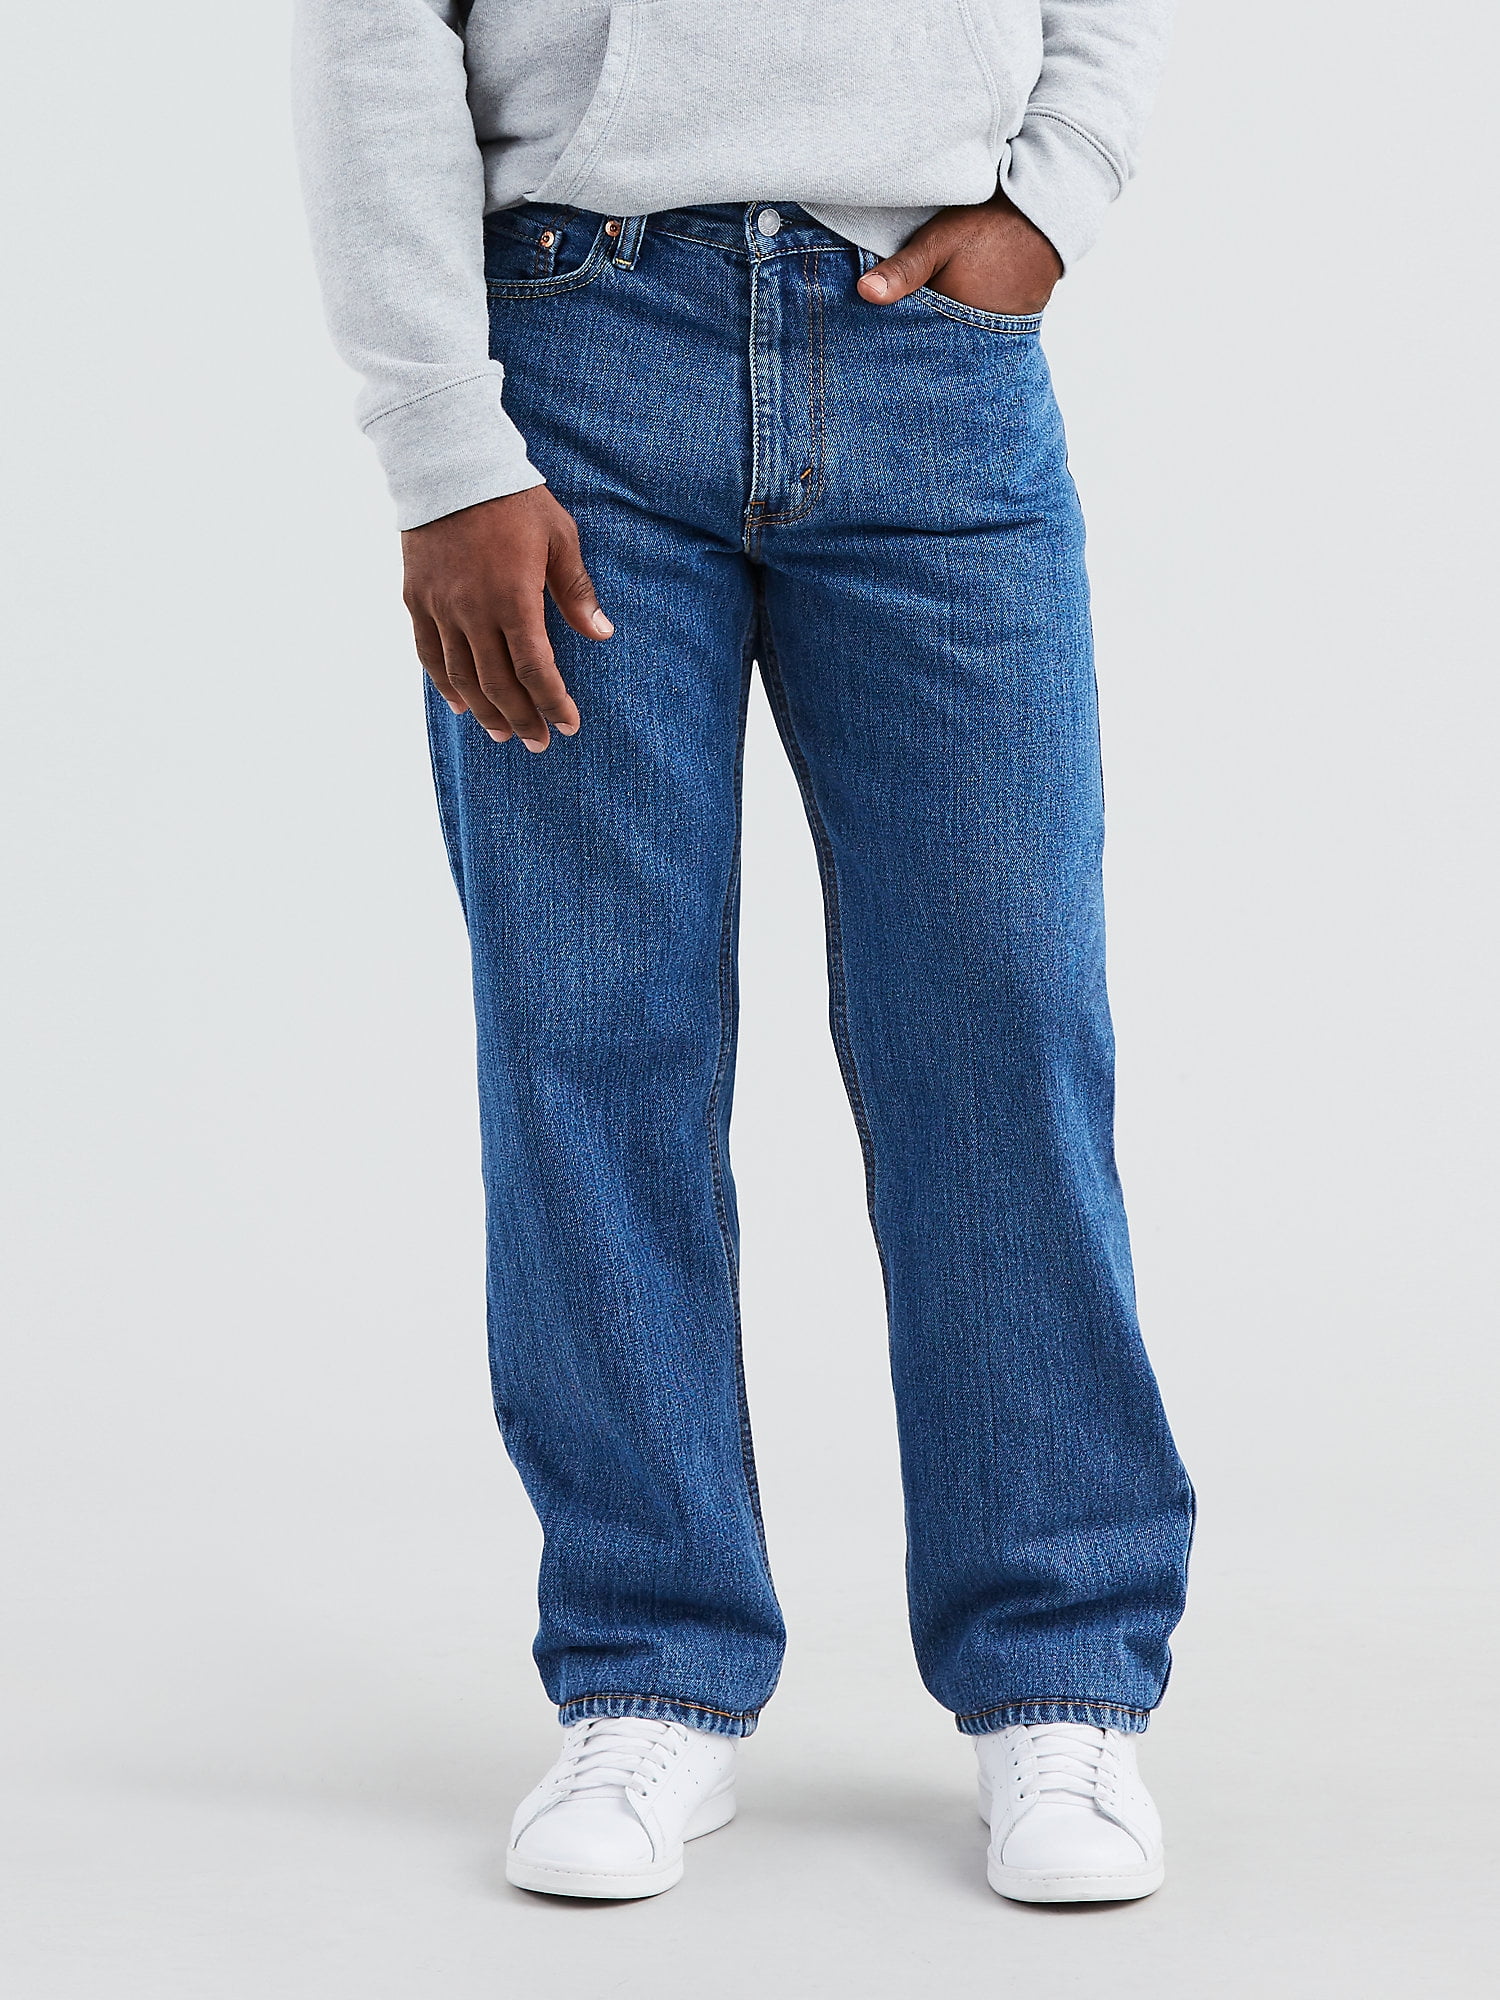 Levi/'s Mens 550 Relaxed Fit Jean